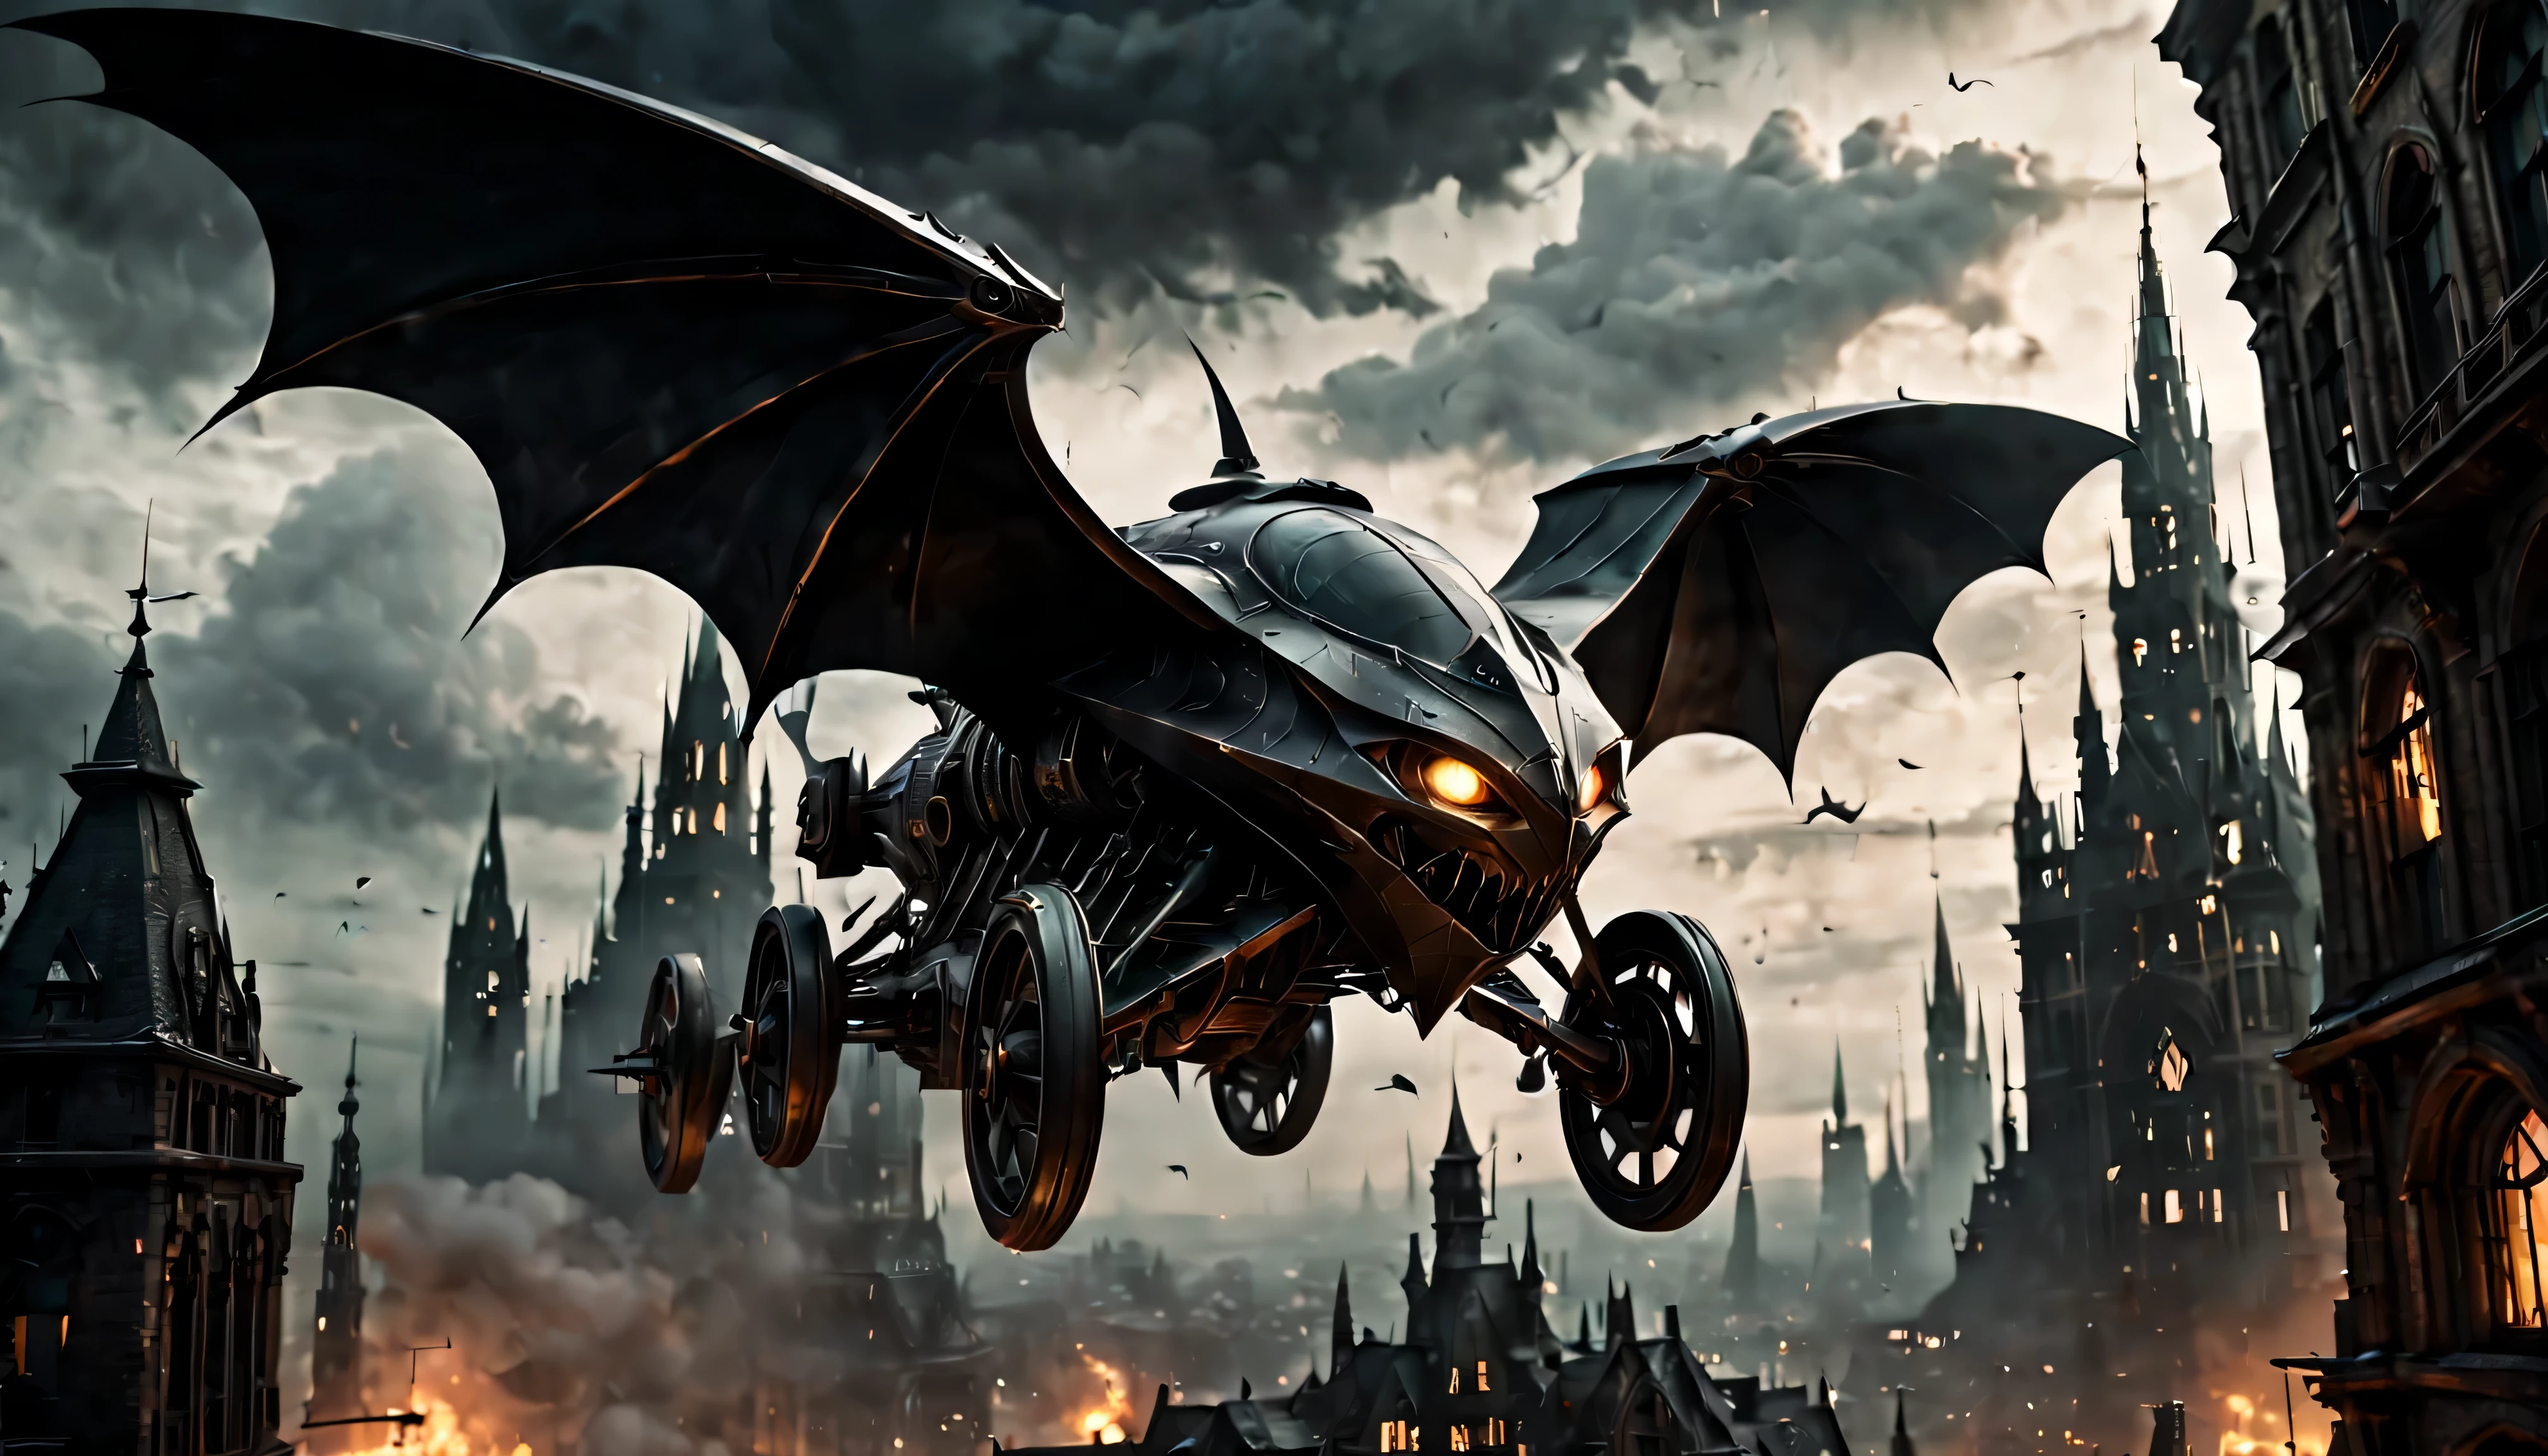 gothic style, flying car, gothic style science fiction, gothic style future skyscrapers

(best quality,4k,8k,highres,masterpiece:1.2),ultra-detailed,realistic:1.37,medium:oil painting, horror, dark, moody, shadowy atmosphere, ominous clouds, gothic architecture, pointed arches, spires, pinnacles, gargoyles, flying buttresses, dramatic lighting, stormy sky, gleaming metal wings, flying car hovering in the air, graceful movement, advanced propulsion system, innovative energy source, propeller-less design, ornate carvings, elaborate ironwork, twisted spires, reaching high into the sky, mechanical marvels, futuristic design, flickering neon lights, steampunk elements, mysterious figures, hooded cloaks, outlines against the night sky, metallic hues, narrow streets, winding alleys, steam rising from manhole covers, electric sparks, smoke billowing from chimneys, detailed cityscape, skyscrapers piercing the clouds, illuminated windows, glowing signs, haunting ambiance, breathtaking vistas, imposing structures, gravity-defying architecture, otherworldly beauty.